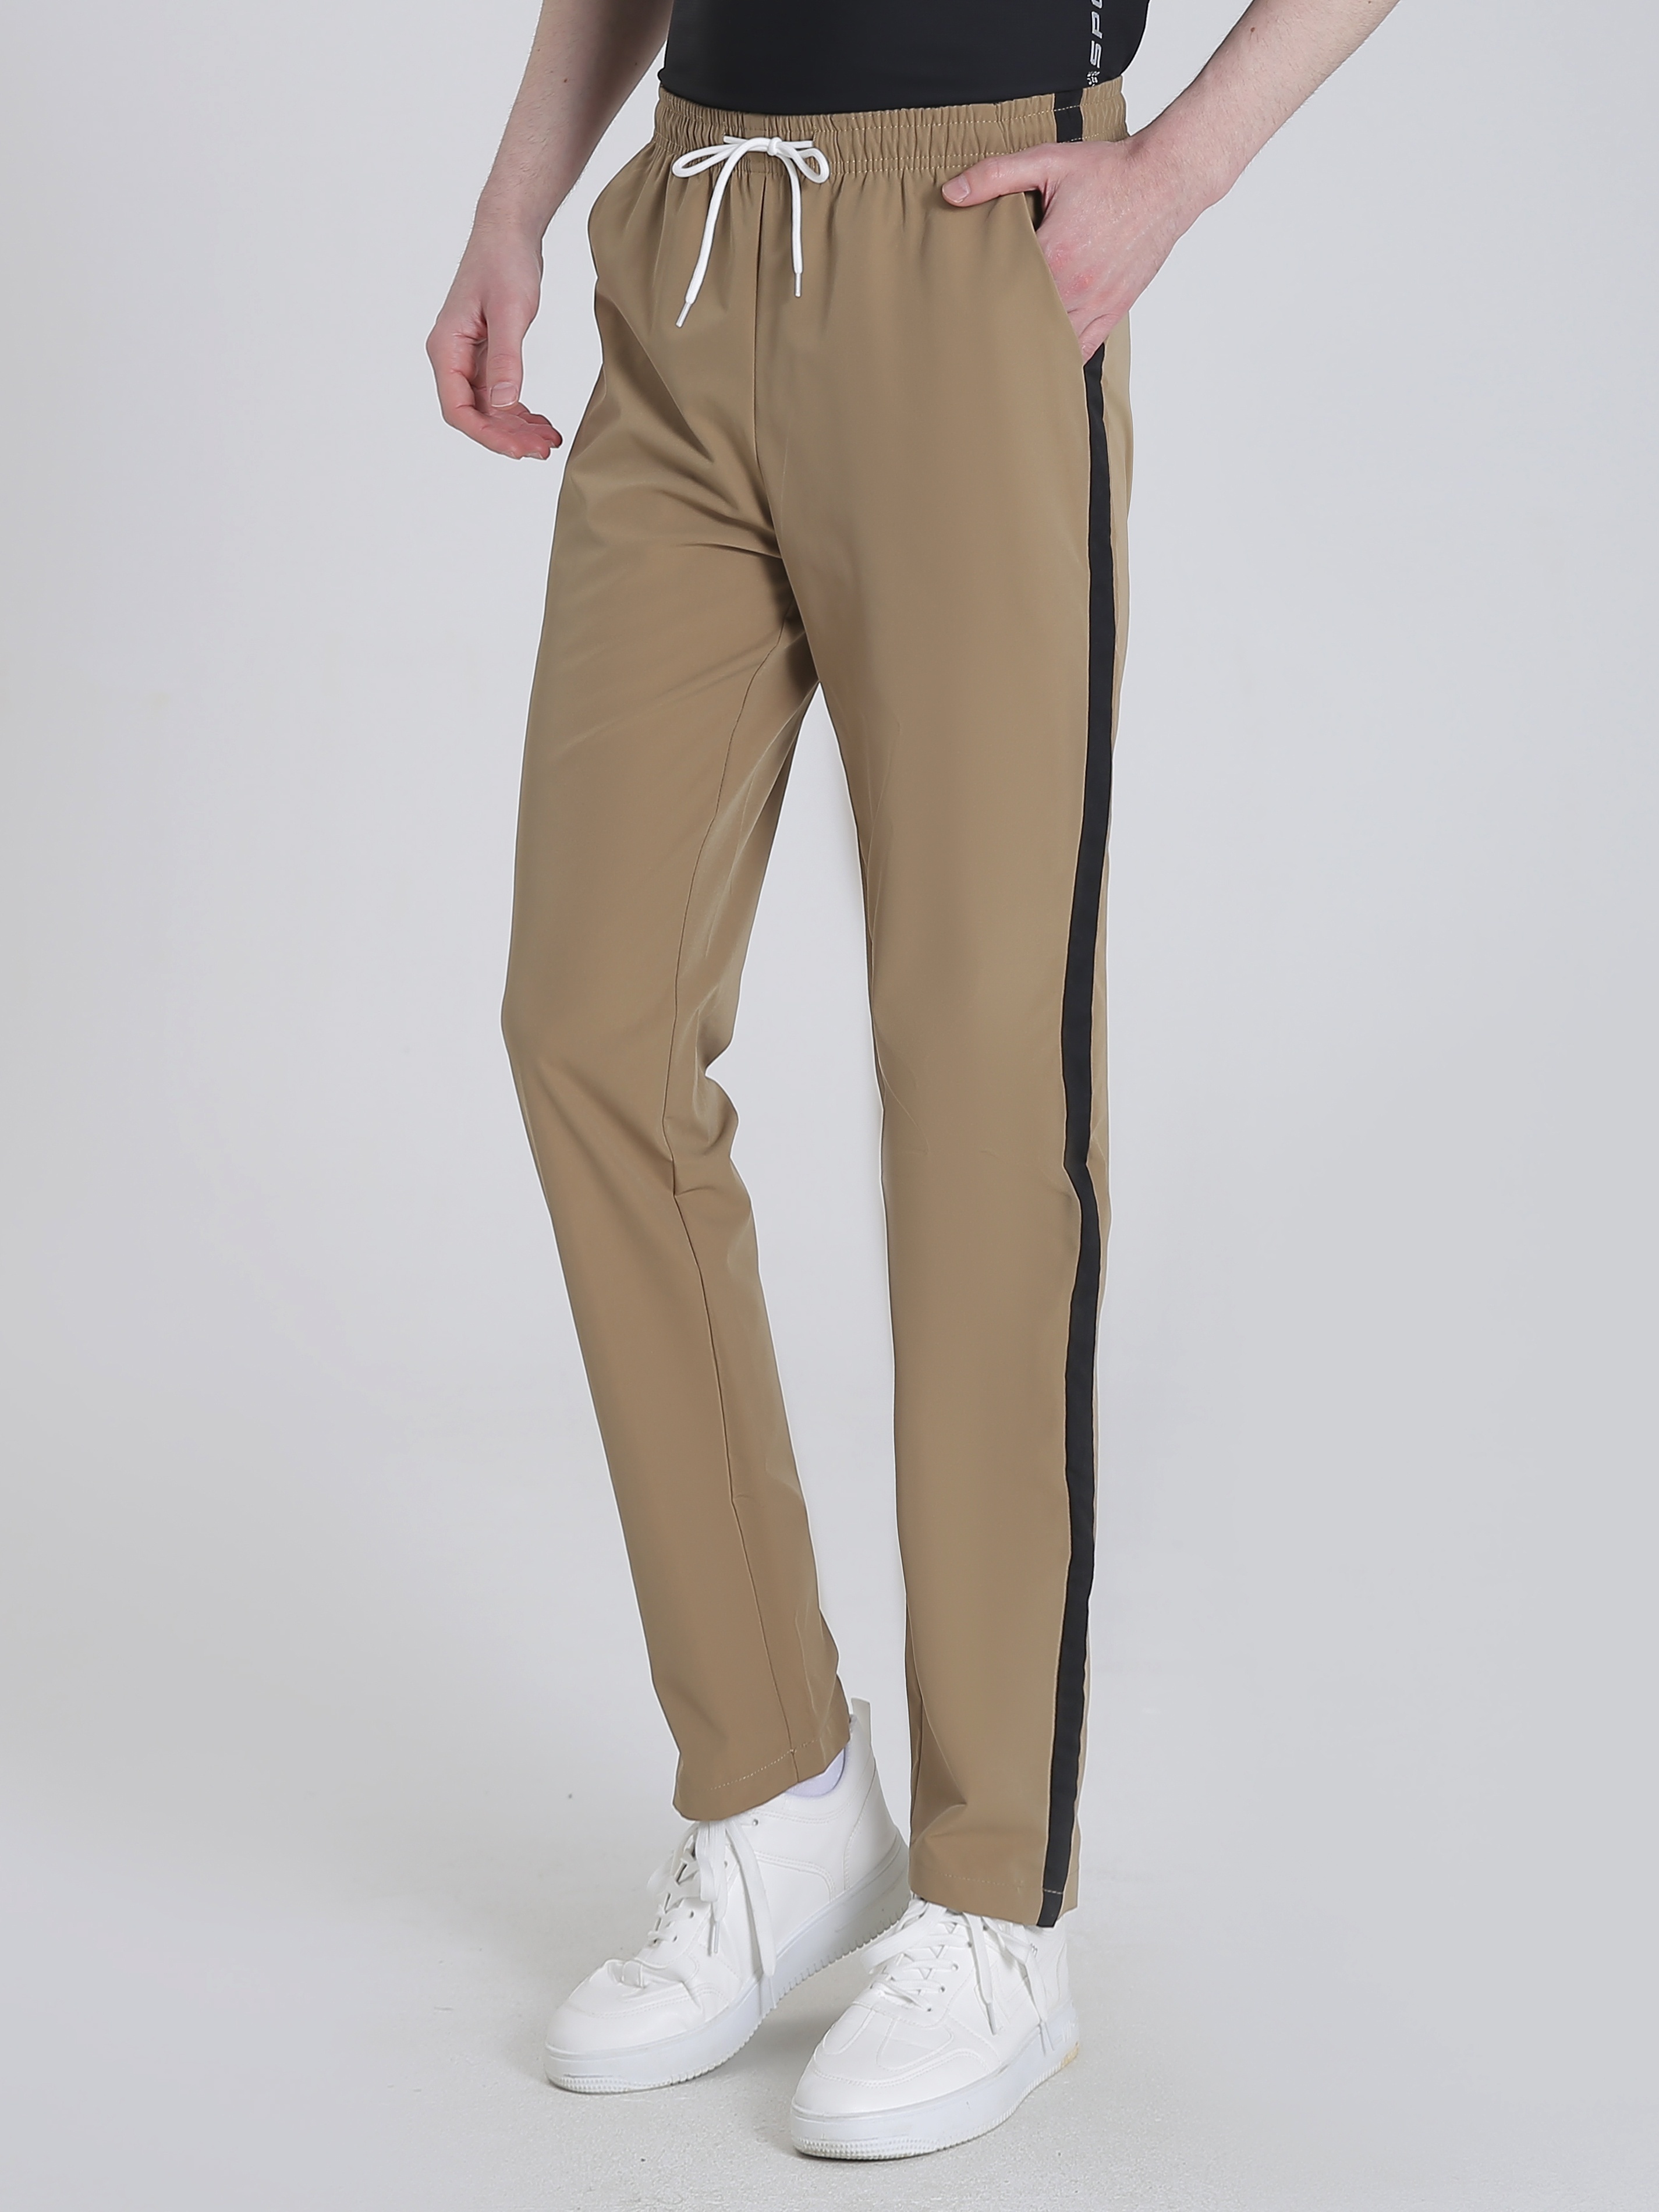 Buy Charcoal Straight Leg Stripe Trousers from the Pineapple online store